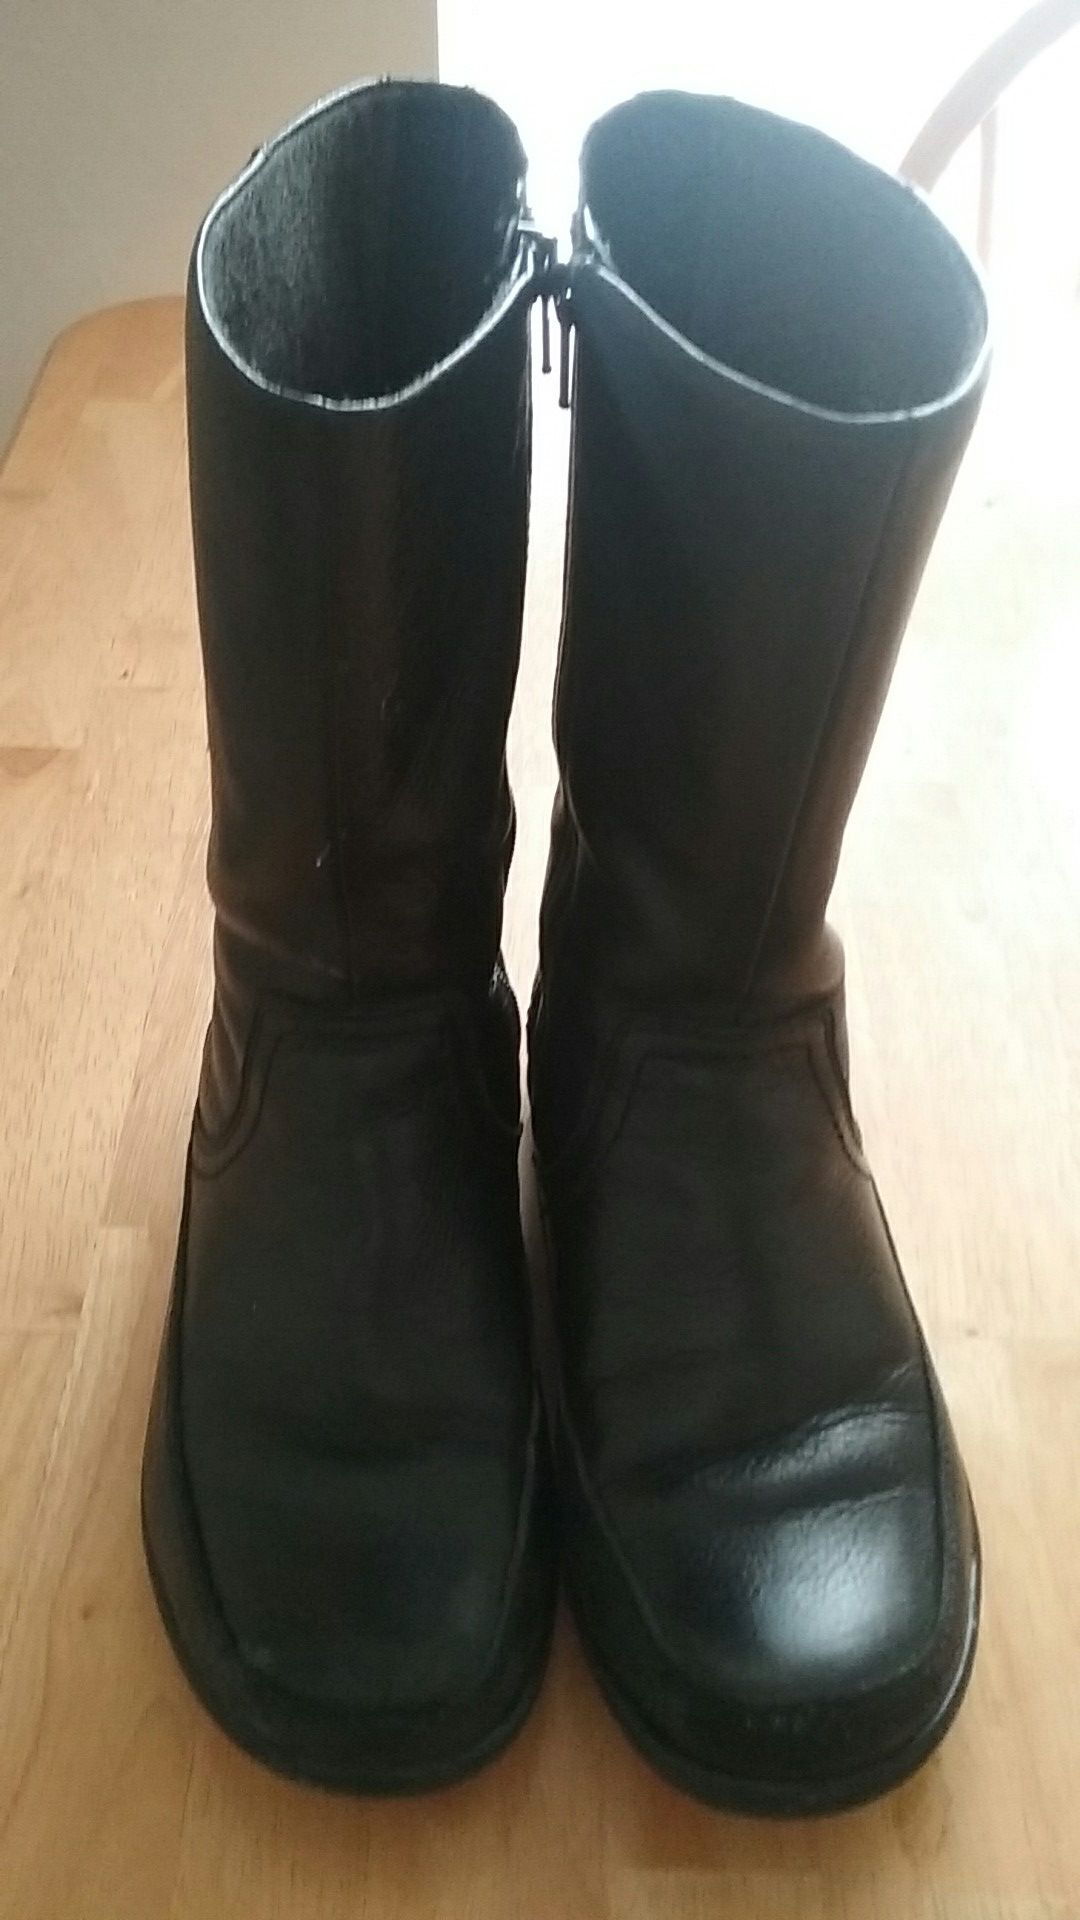 Clarks Women's boots, size 8,Clean and Good condition